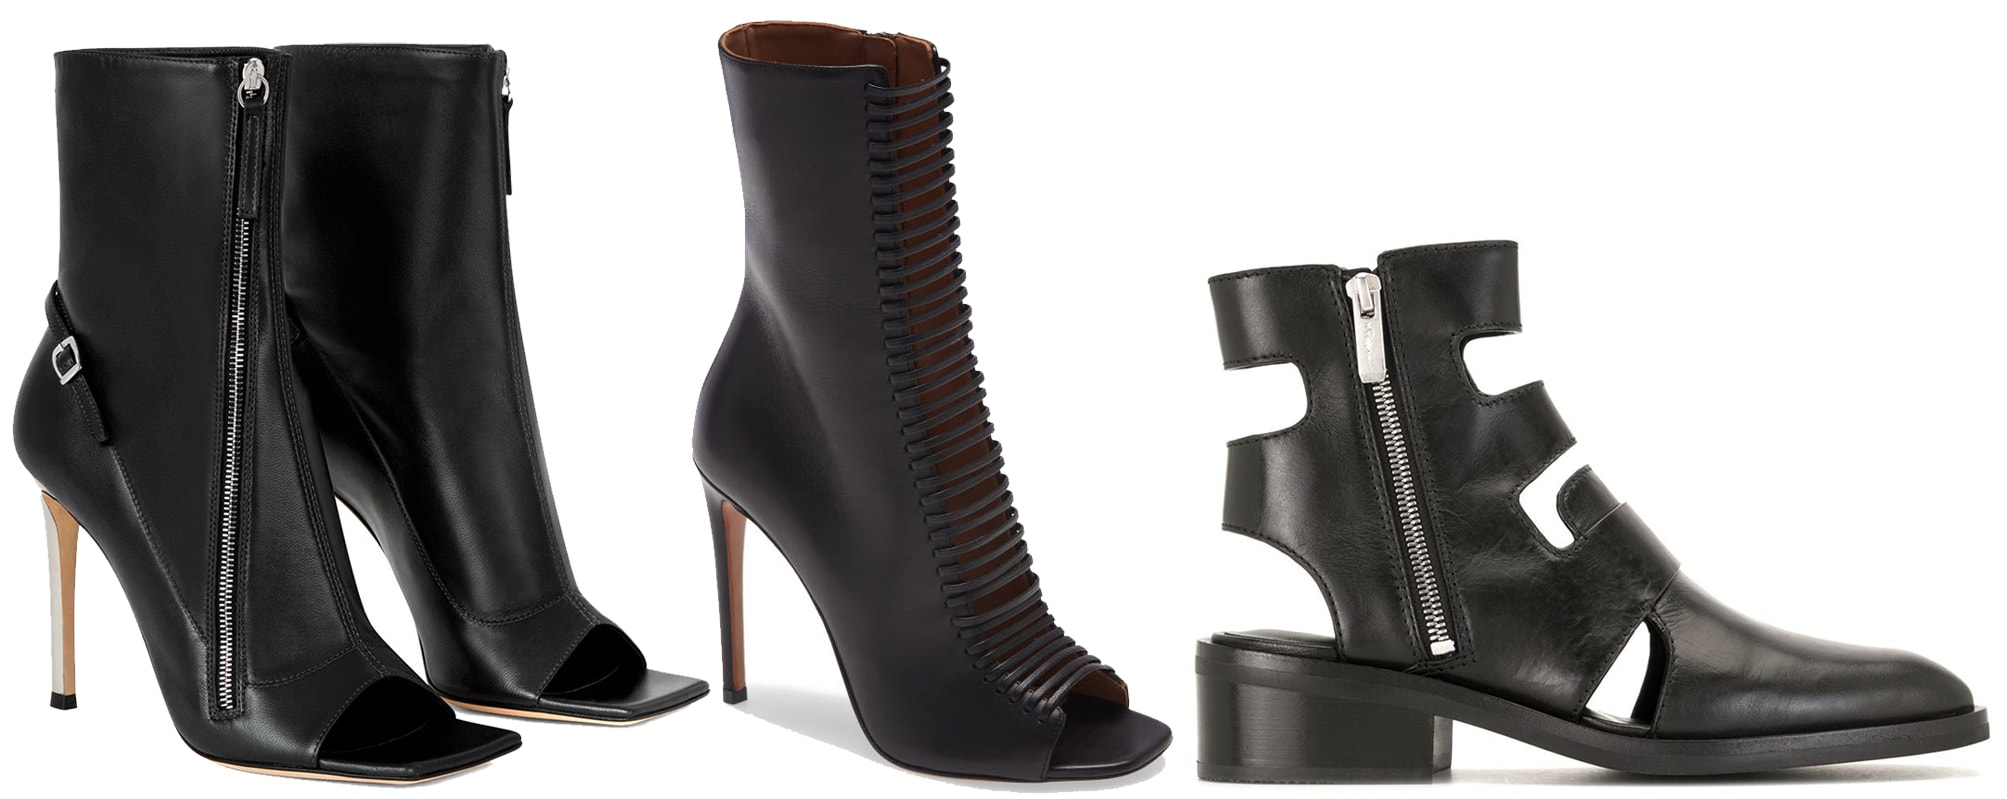 Cut-out boots, with various styles like open toes and side cut-outs, bring a modern twist to traditional silhouettes, blending fashion and functionality